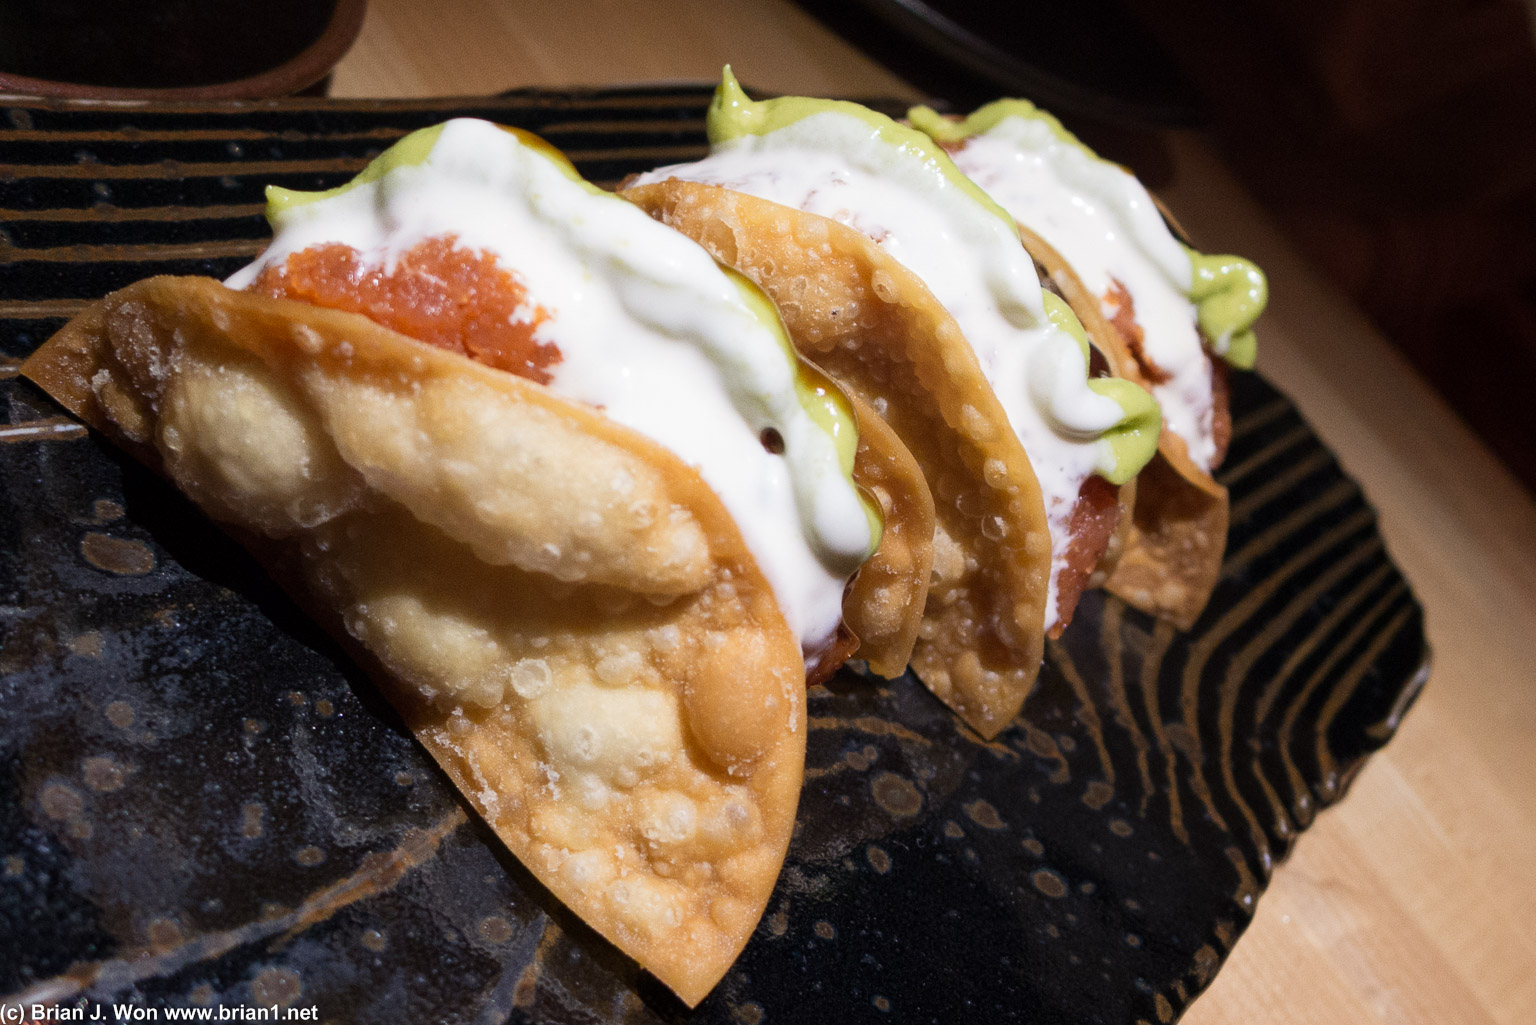 Spicy tuna tacos were amazing, tho. Best execution of such a fusion concept I've had.